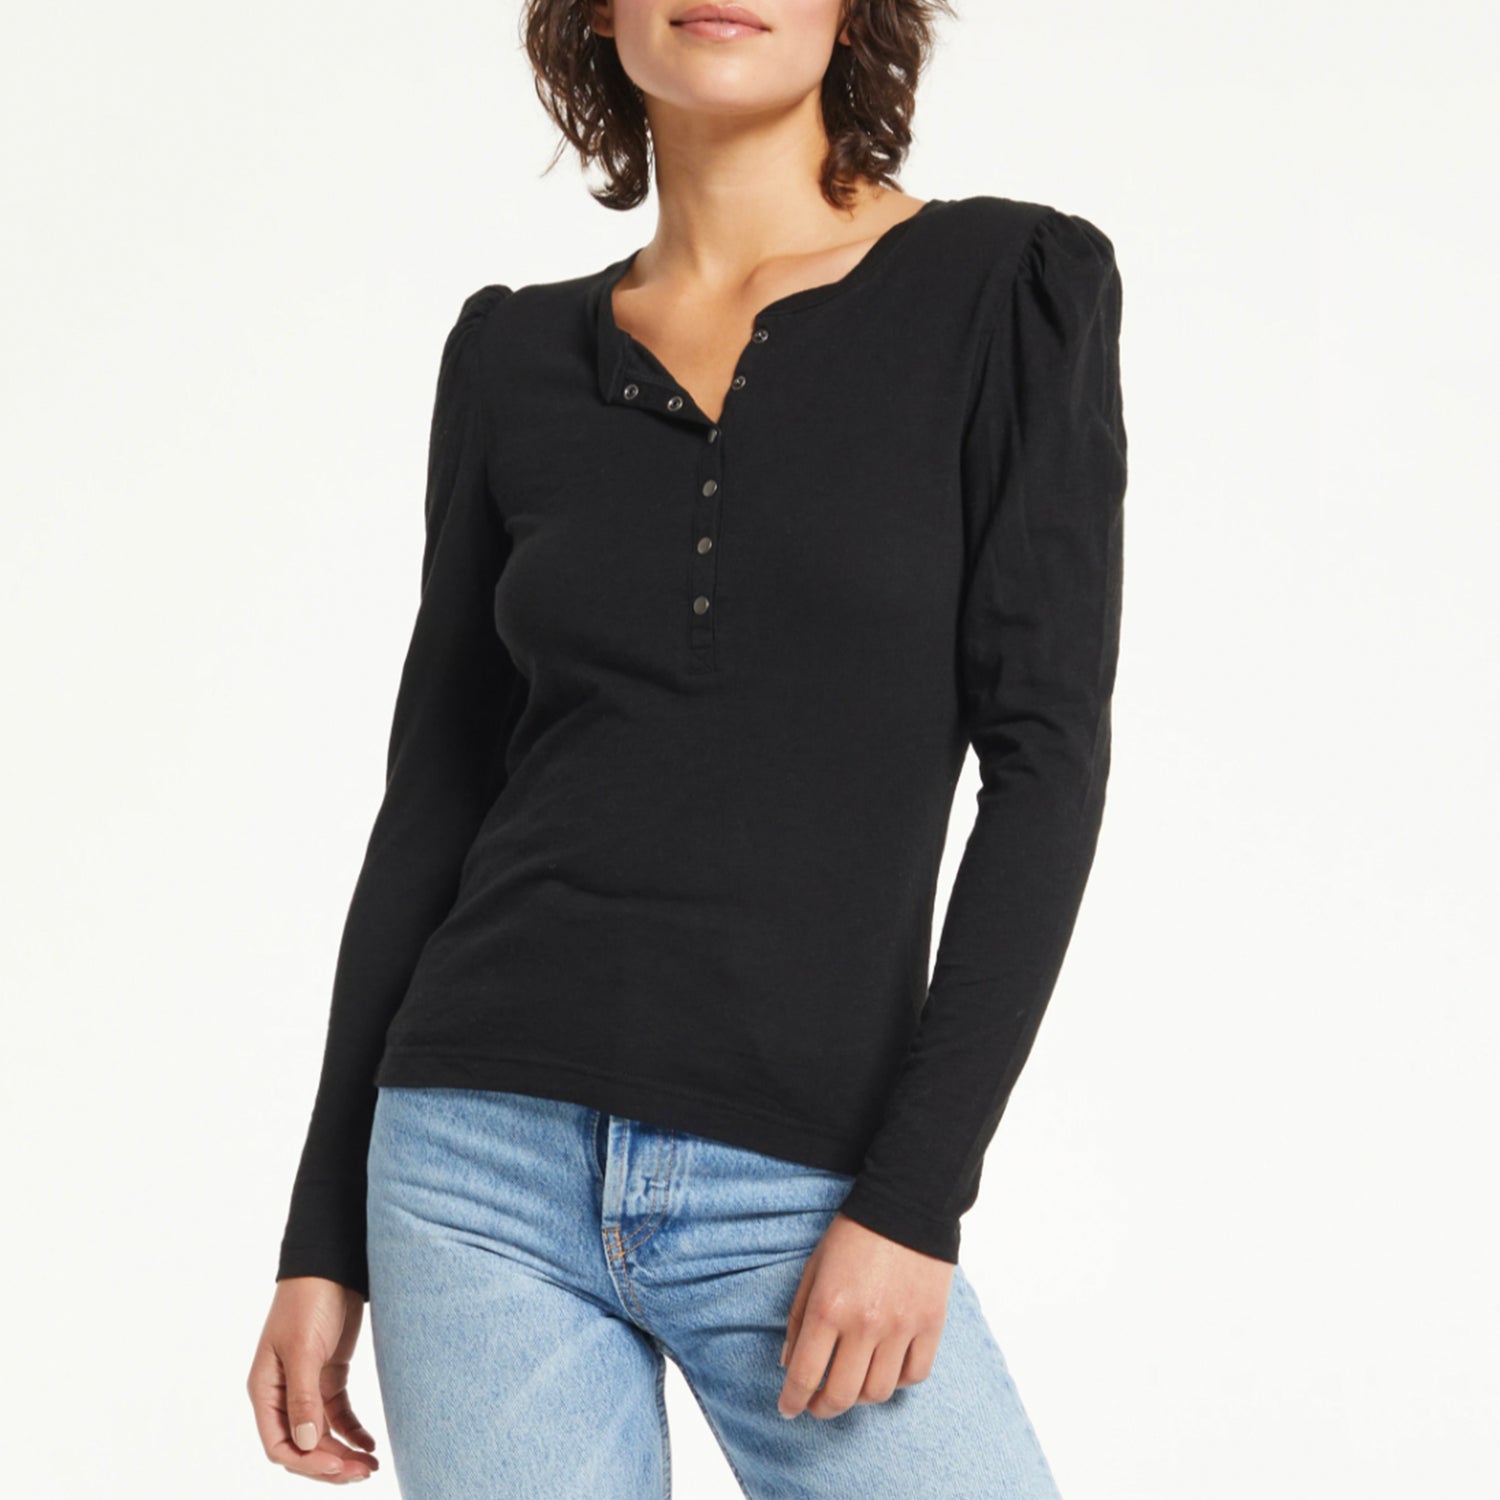 Z Supply Liv Brushed Slub Henley. The Z Supply Liv Brushed Slub Henley Top is an easy choice for so many occasions. This top features a set in puff shoulder, and a rounded neckline with snap closure. You can dress this style up or down, it's so versatile!